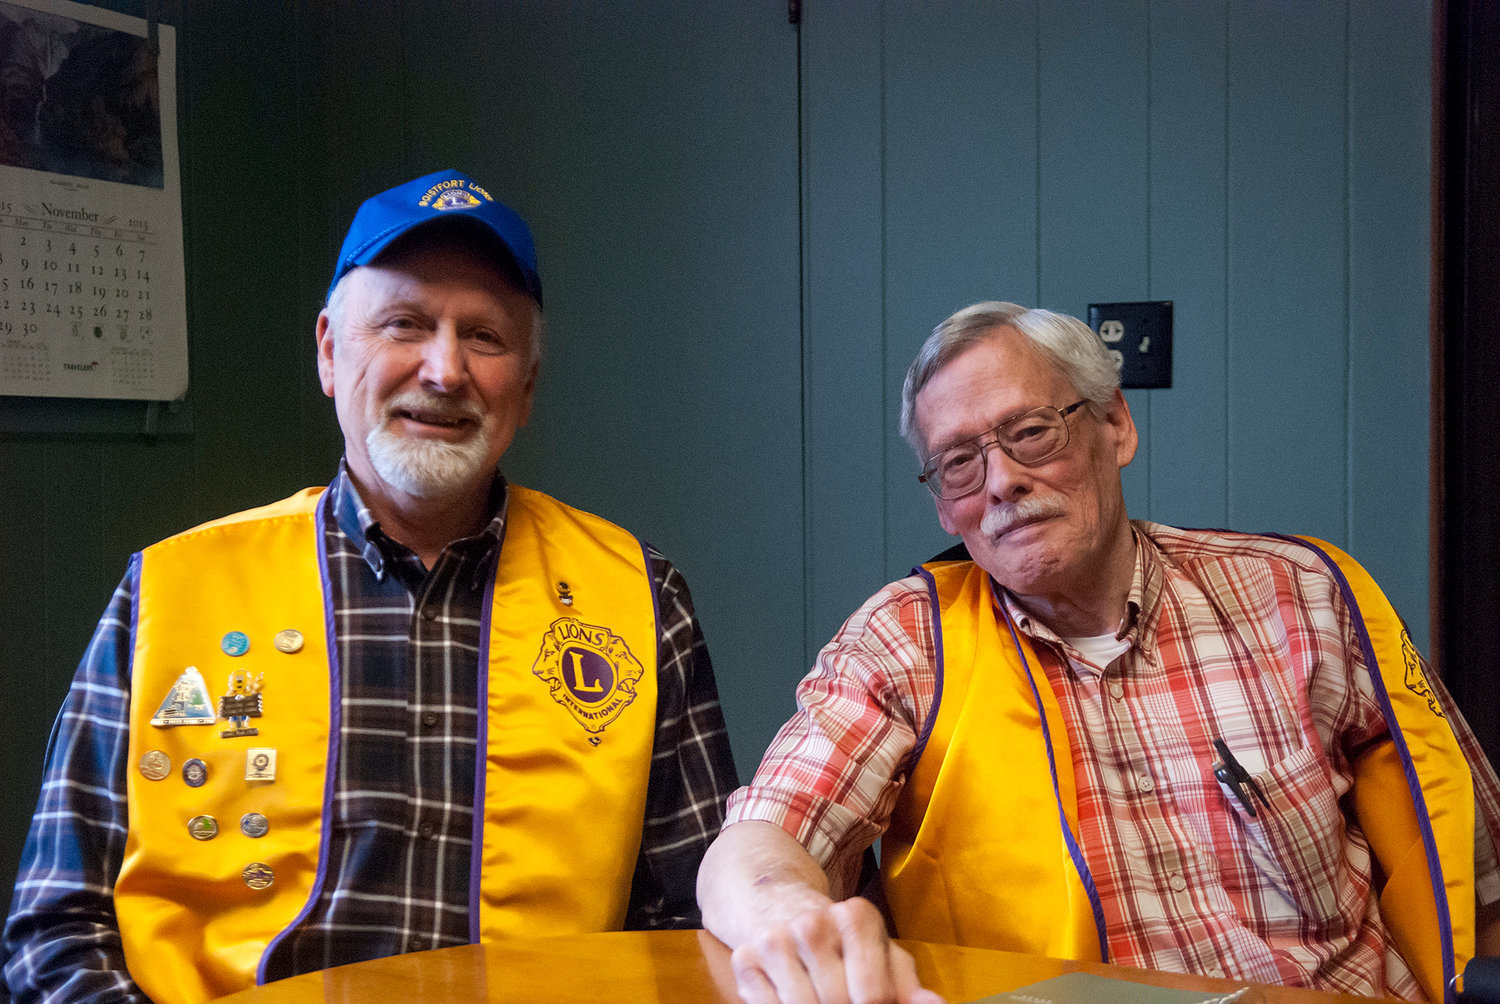 FILE PHOTO — Barry Panush, left, and Bill Hunter, of the Boistfort Lions Club, spoke about the club’s history with the Walk-N-Knock program in Lewis County in 2015.